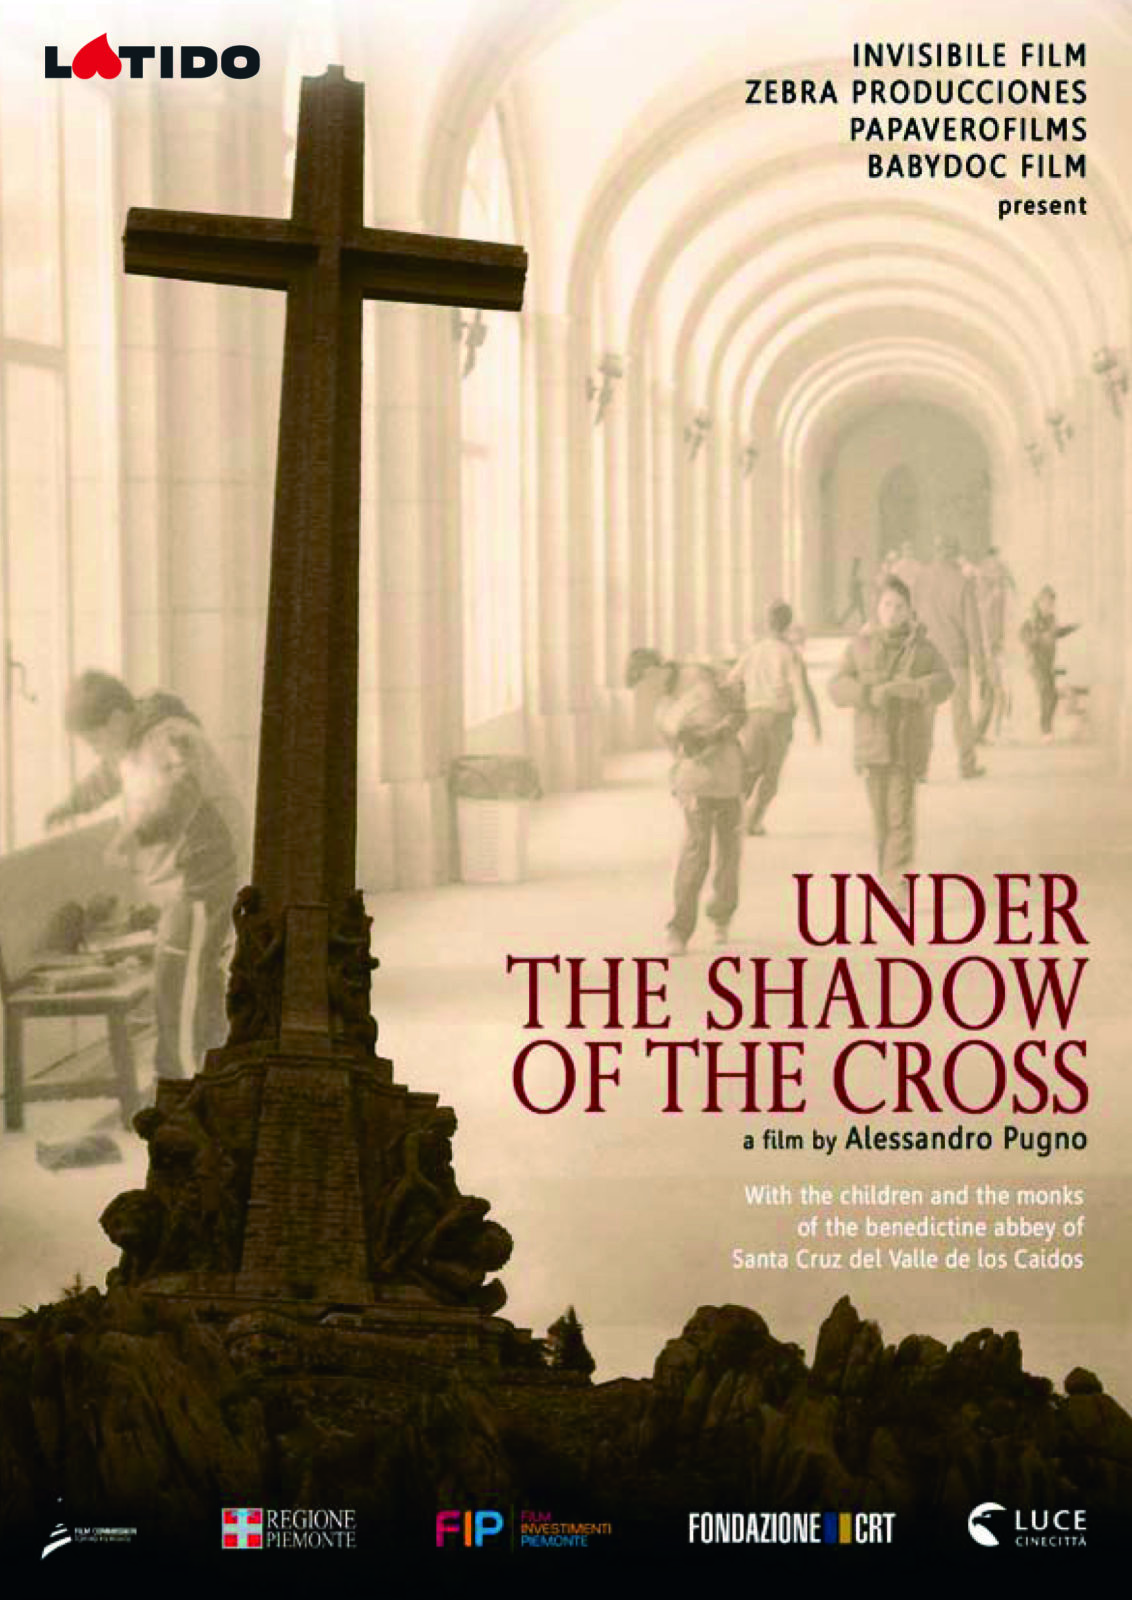 UNDER THE SHADOW OF THE CROSS